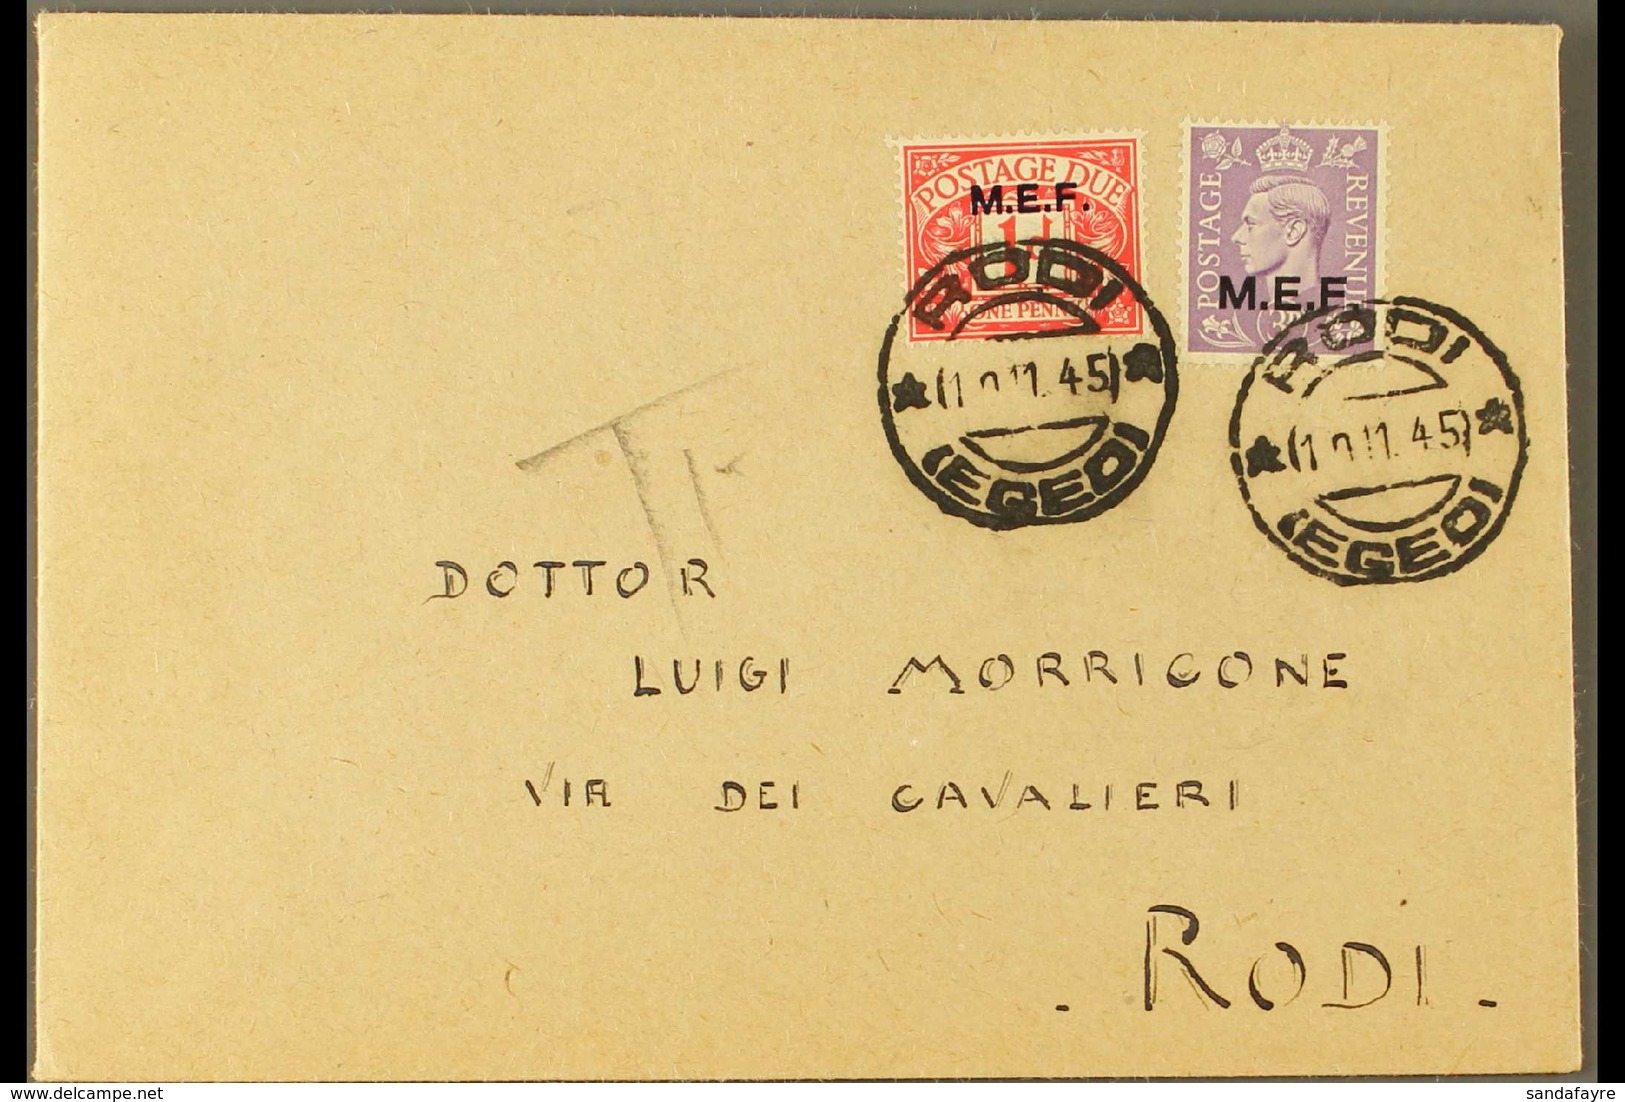 M.E.F. 1945, Two Attractive Envelopes, Each Bearing Postage Due 1d (one In Combination With Postage 3d), Tied Symi/Dodec - Afrique Orientale Italienne